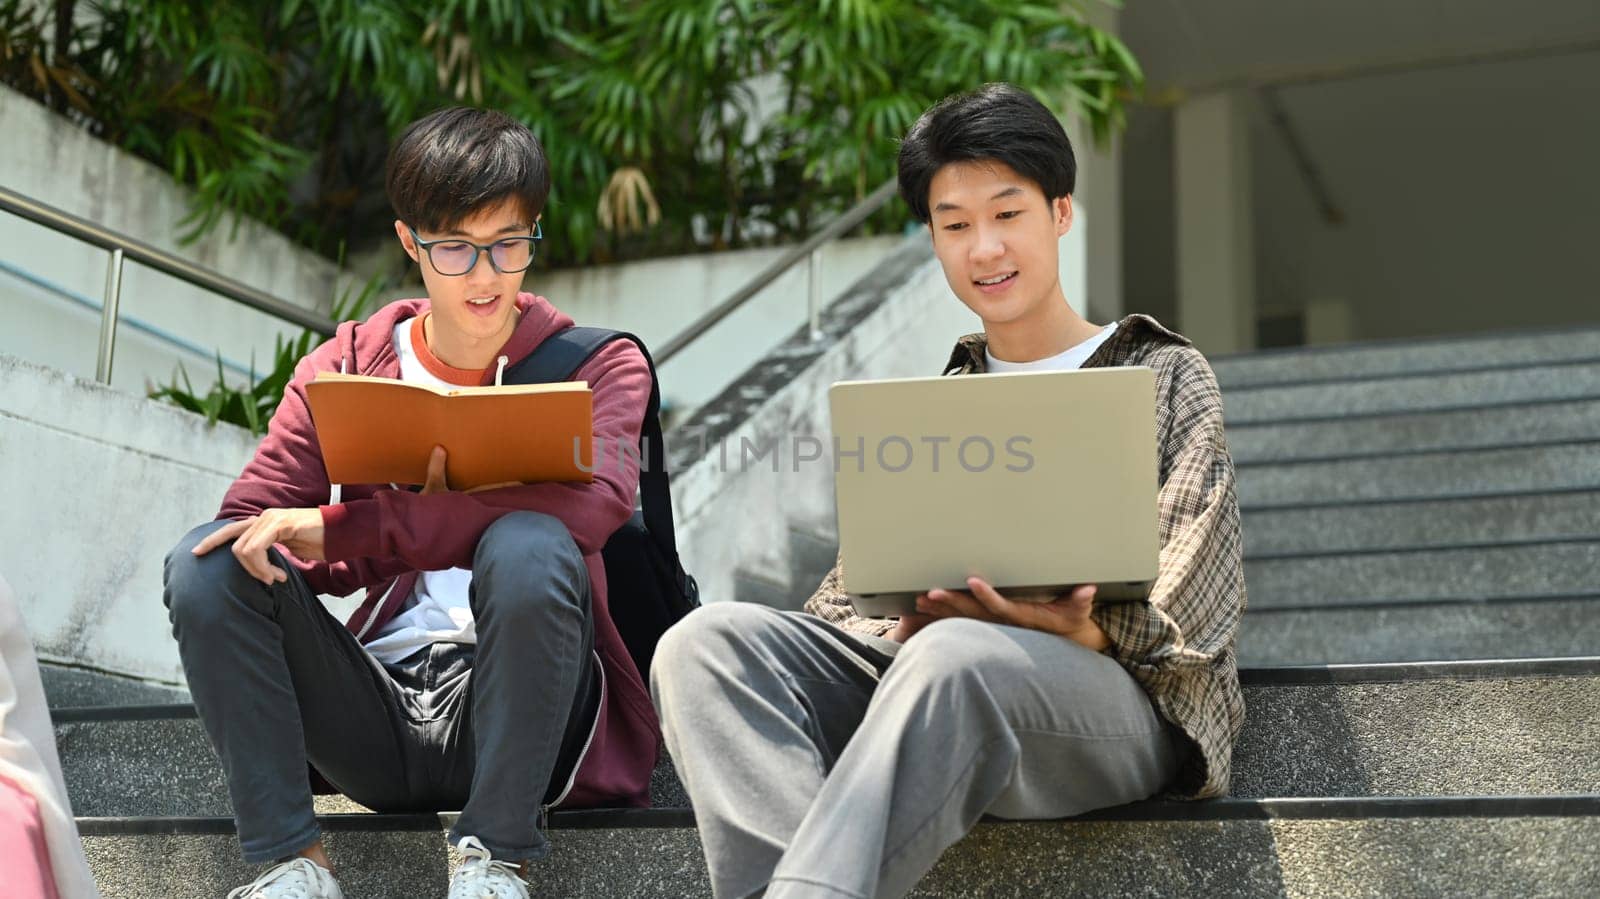 University students sitting on stairs and talking to each other after classes. Education and youth lifestyle concept.